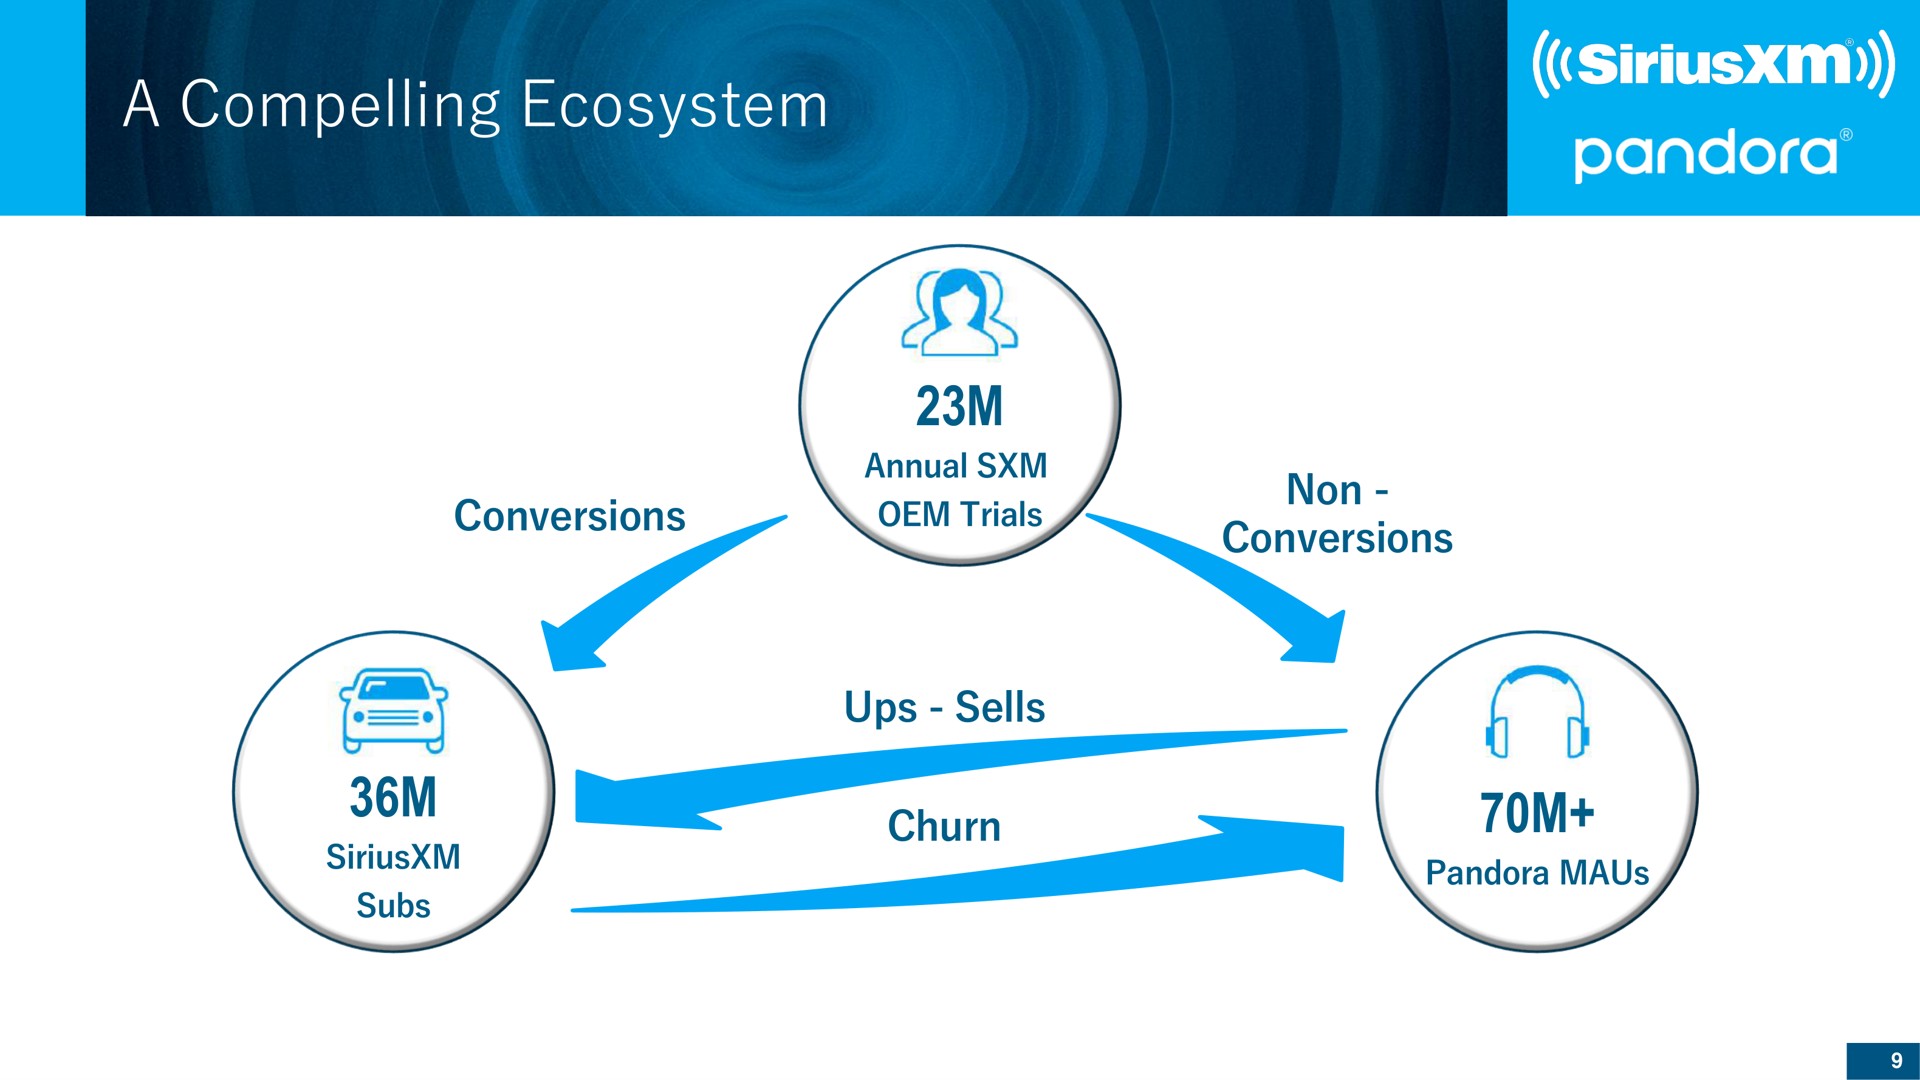 a compelling ecosystem | SiriusXM